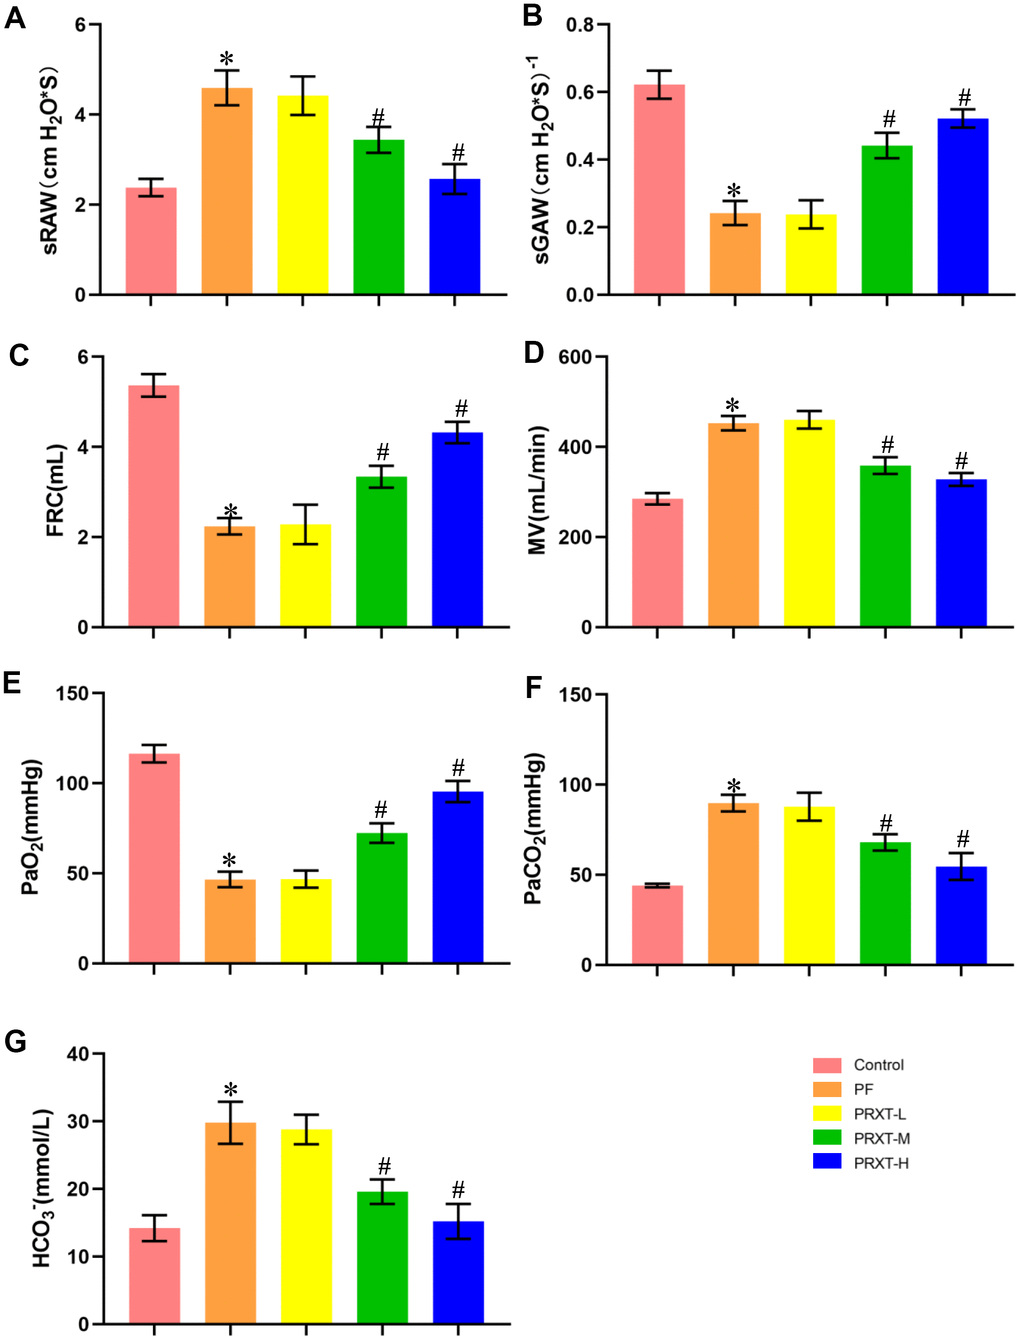 PRXT treatment ameliorated lung pathological injury and improved survival rate in bleomycin-induced mice. (A–D) Analyses of pulmonary function parameters in the indicated groups including specific airway resistance (sRaw), specific airway conductance (sGaw), functional residual capacity (FRC), as well as minute volume (MV) (n=5). (E–G) Analyses of arterial blood gas including PaO2, PaCO2, and HCO3- in the indicated groups (n=5). *P #P −1·day−1). PRTX-M, Paroxetine-Medium dose (5 mg·kg−1·day−1). PRTX-H, Paroxetine-High dose (7.5 mg·kg−1·day−1).